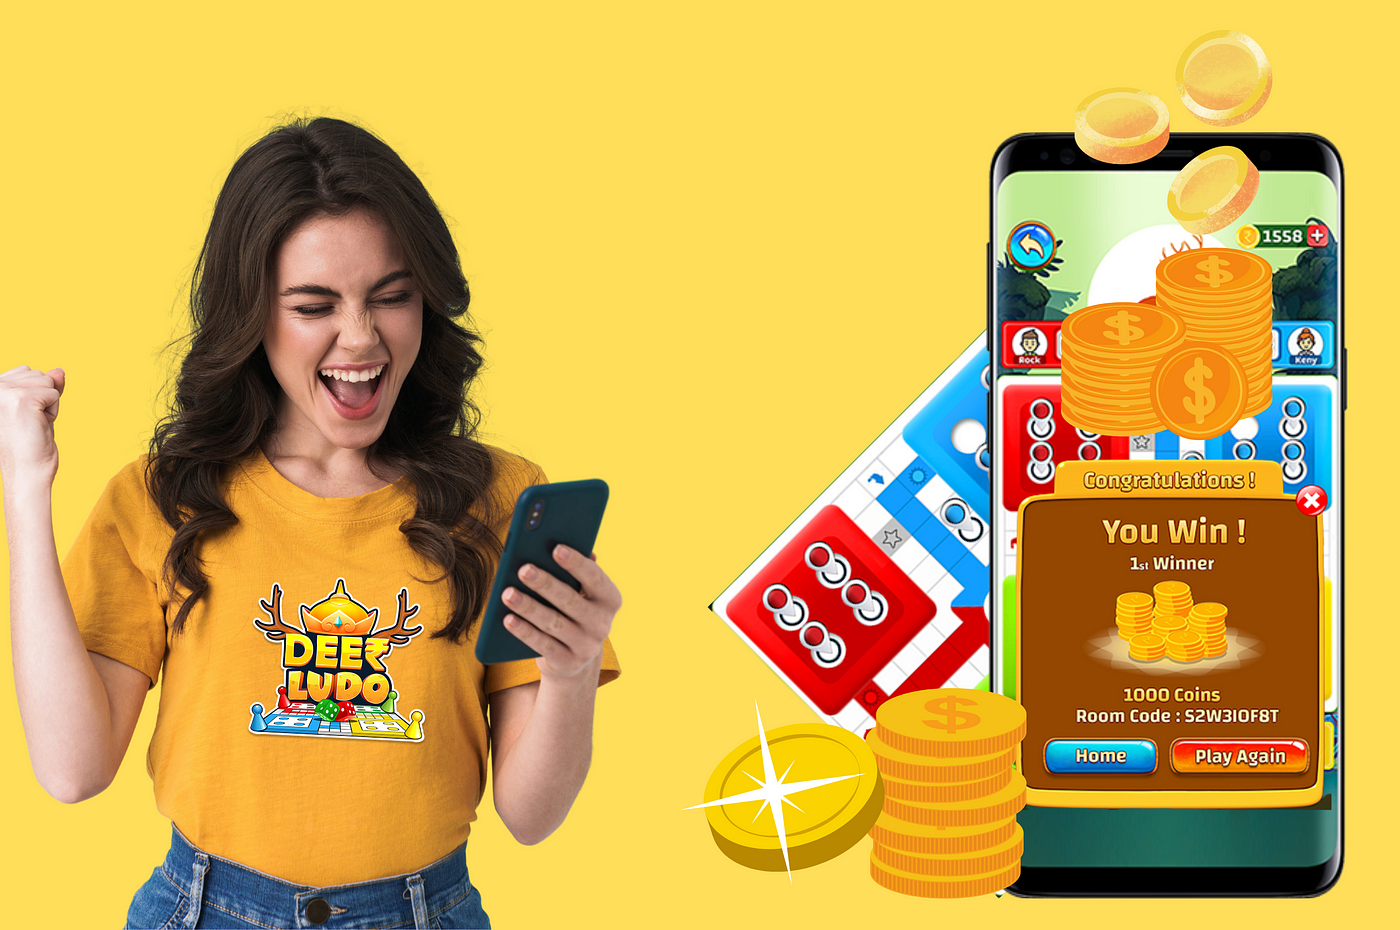 Ludo Online Real Cash Game - Top